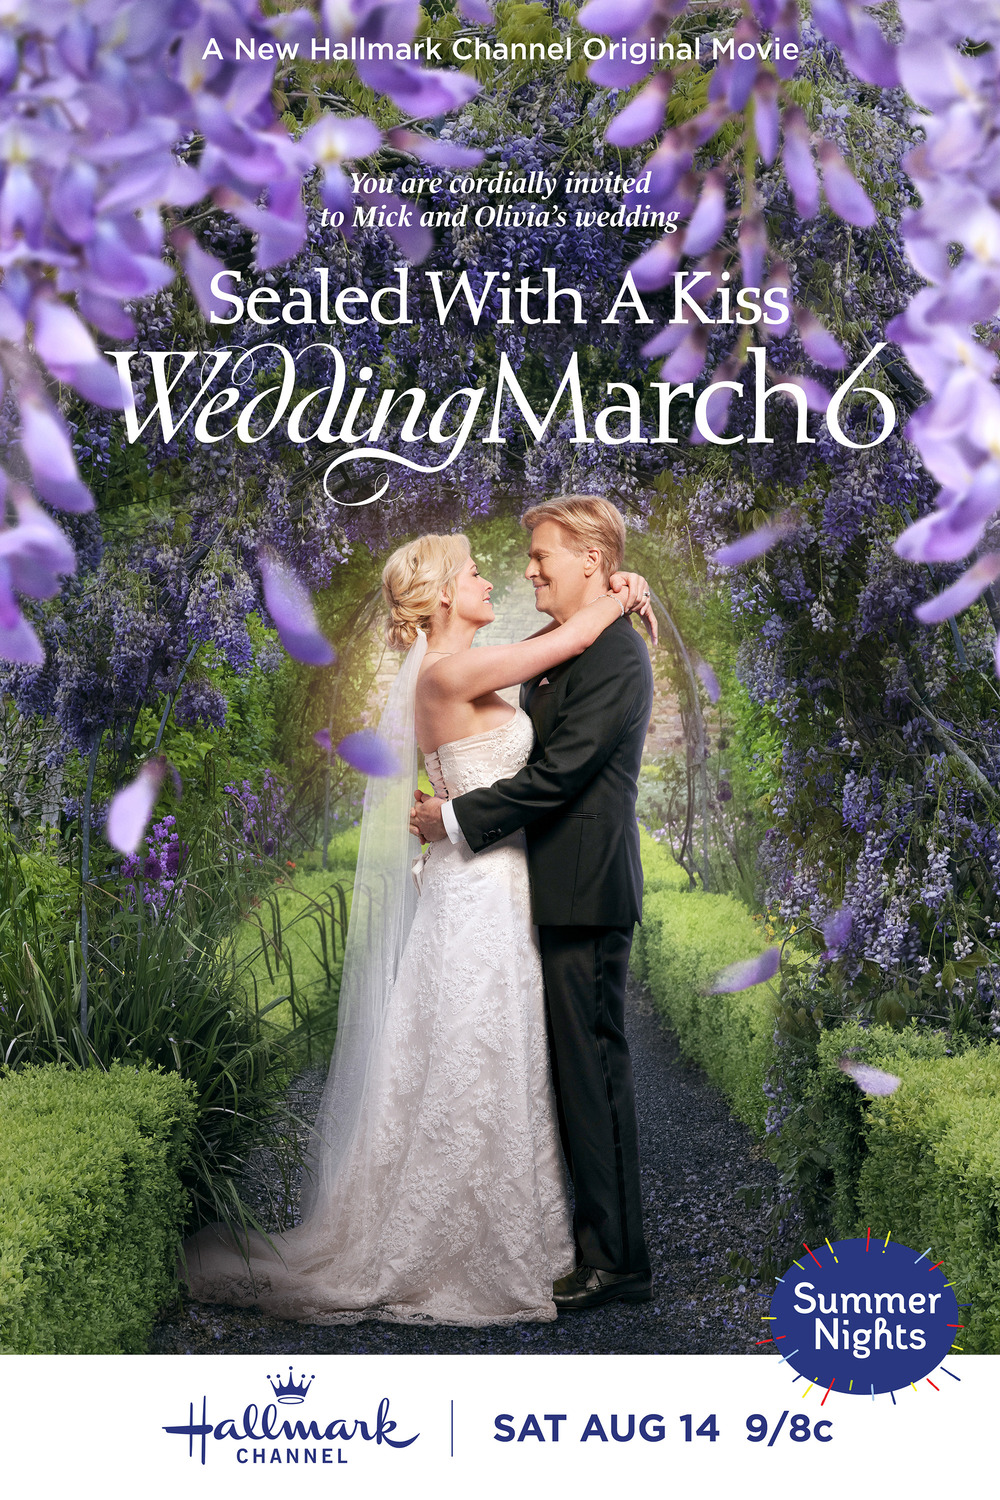 Extra Large TV Poster Image for Sealed with a Kiss: Wedding March 6 